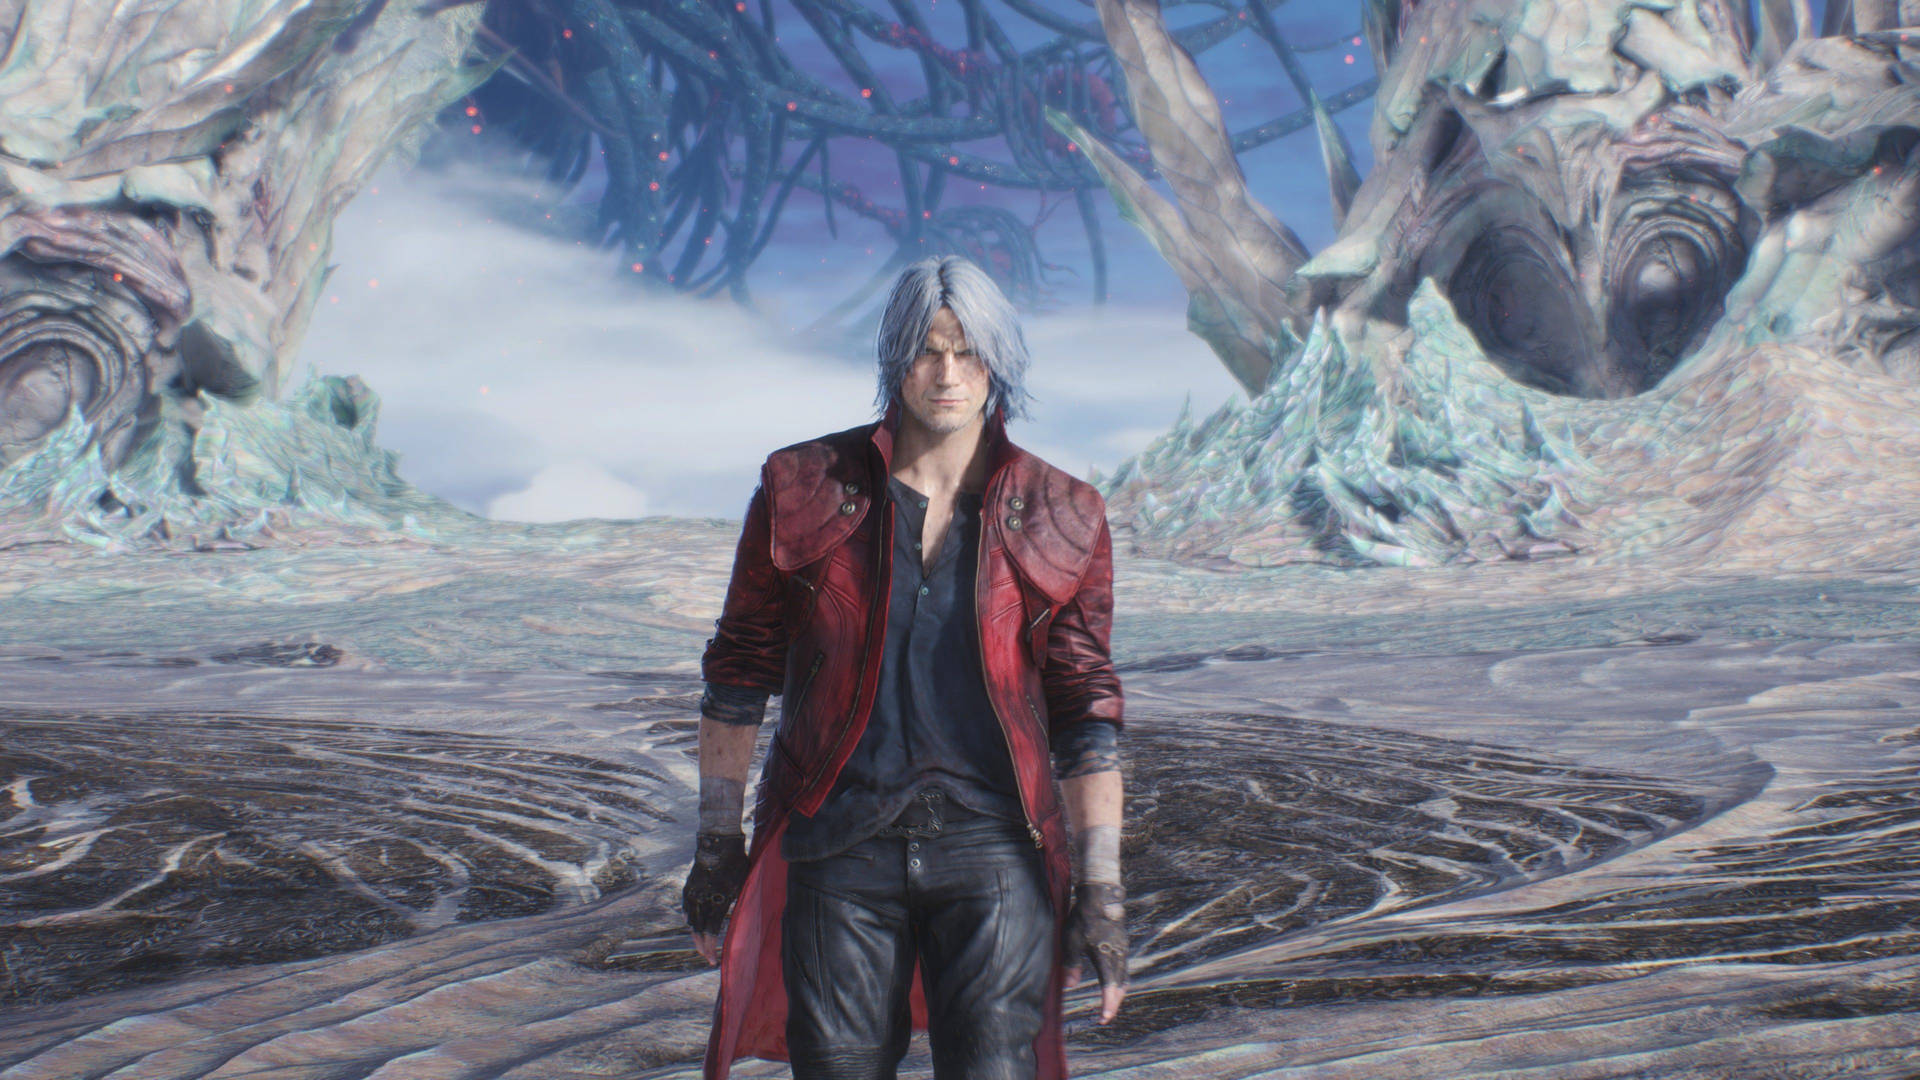 Devil May Cry 5 protagonist Dante unleashes his signature style. Wallpaper